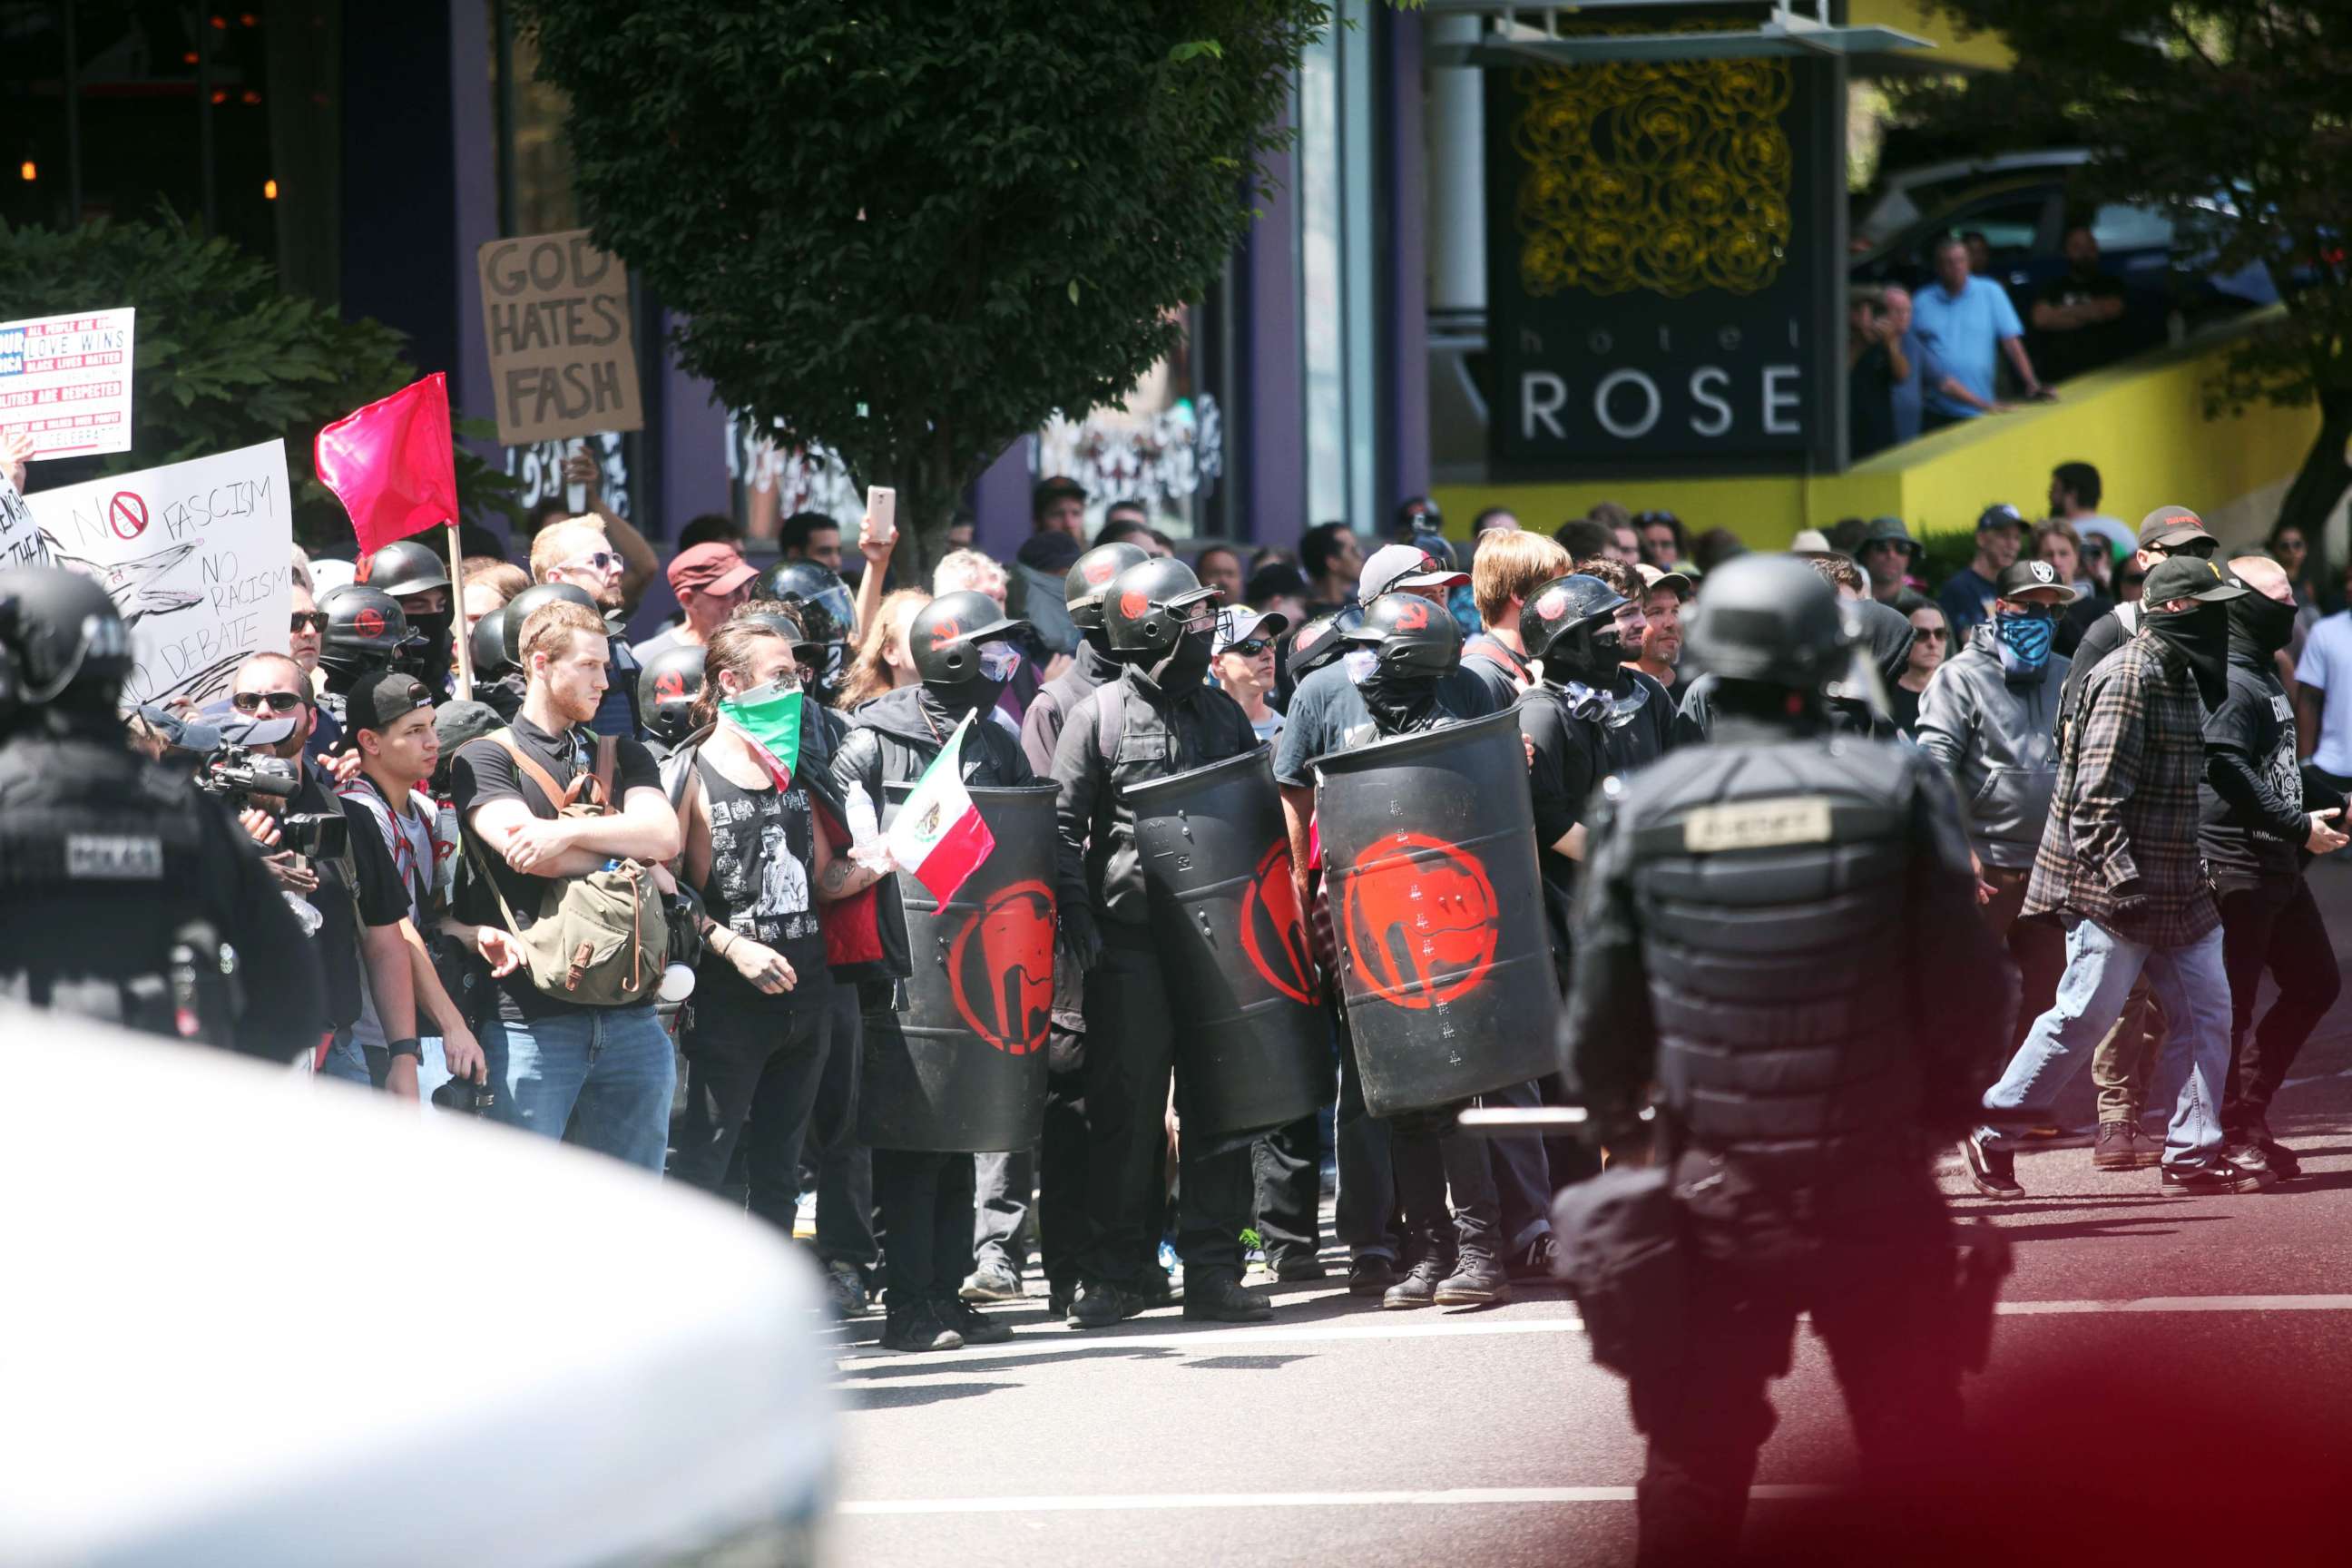 PHOTO: People on all sides of the political spectrum gather for a campaign rally organized by right-wing organizer and Patriot Prayer founder Joey Gibson in Portland, Oregon, August 4, 2018.
